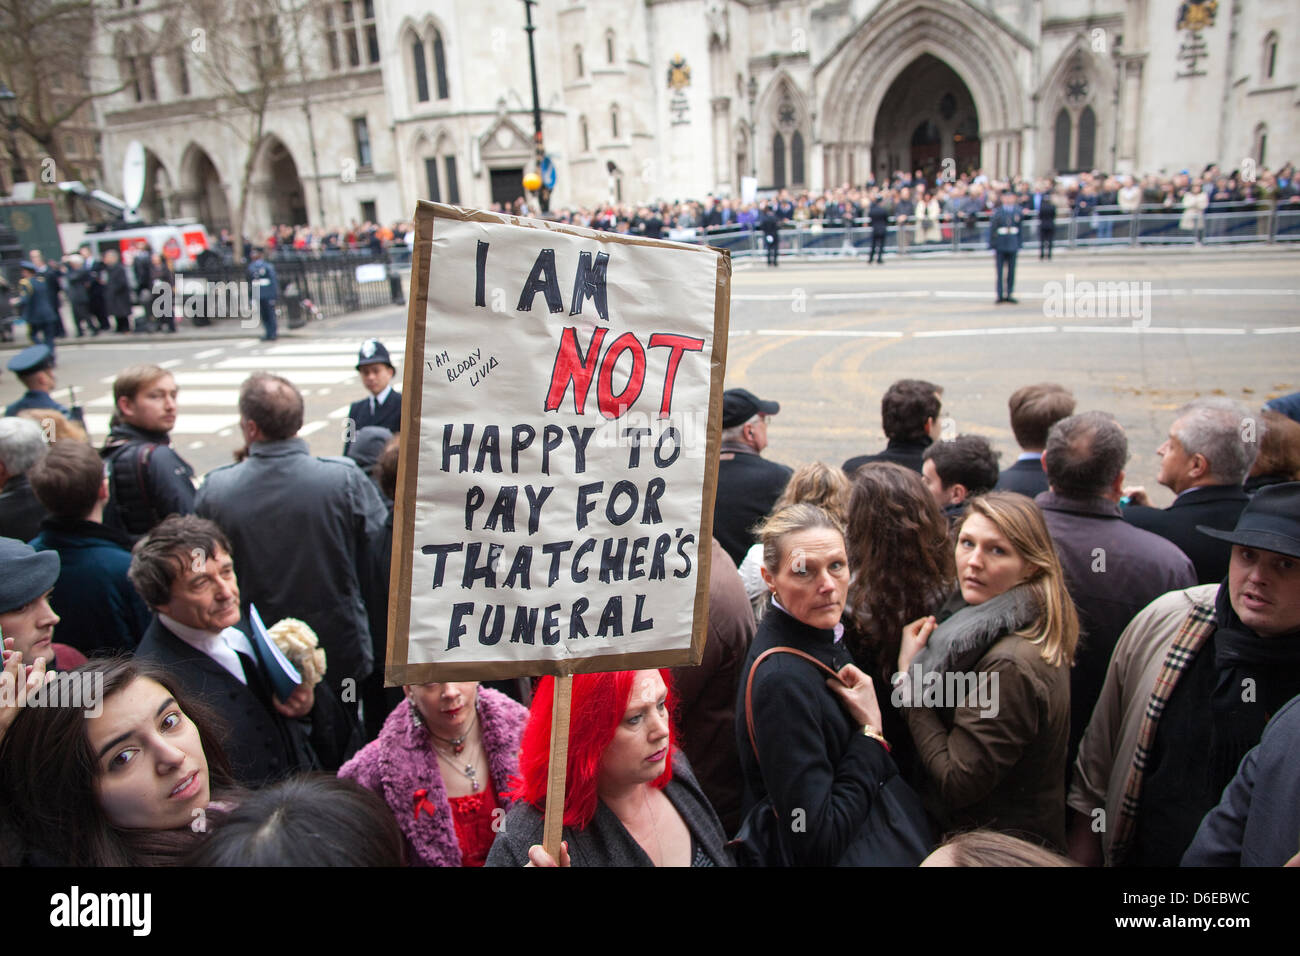 London, UK. 17th April 2013. The Ceremonial Funeral of Former British Prime Minister Baroness Thatcher. Protesters amongst the crowds on the route of the Ceremonial Funeral of Baroness Thatcher pass along Fleet Street, London, UK. Credit: Jeff Gilbert/Alamy Live News Stock Photo